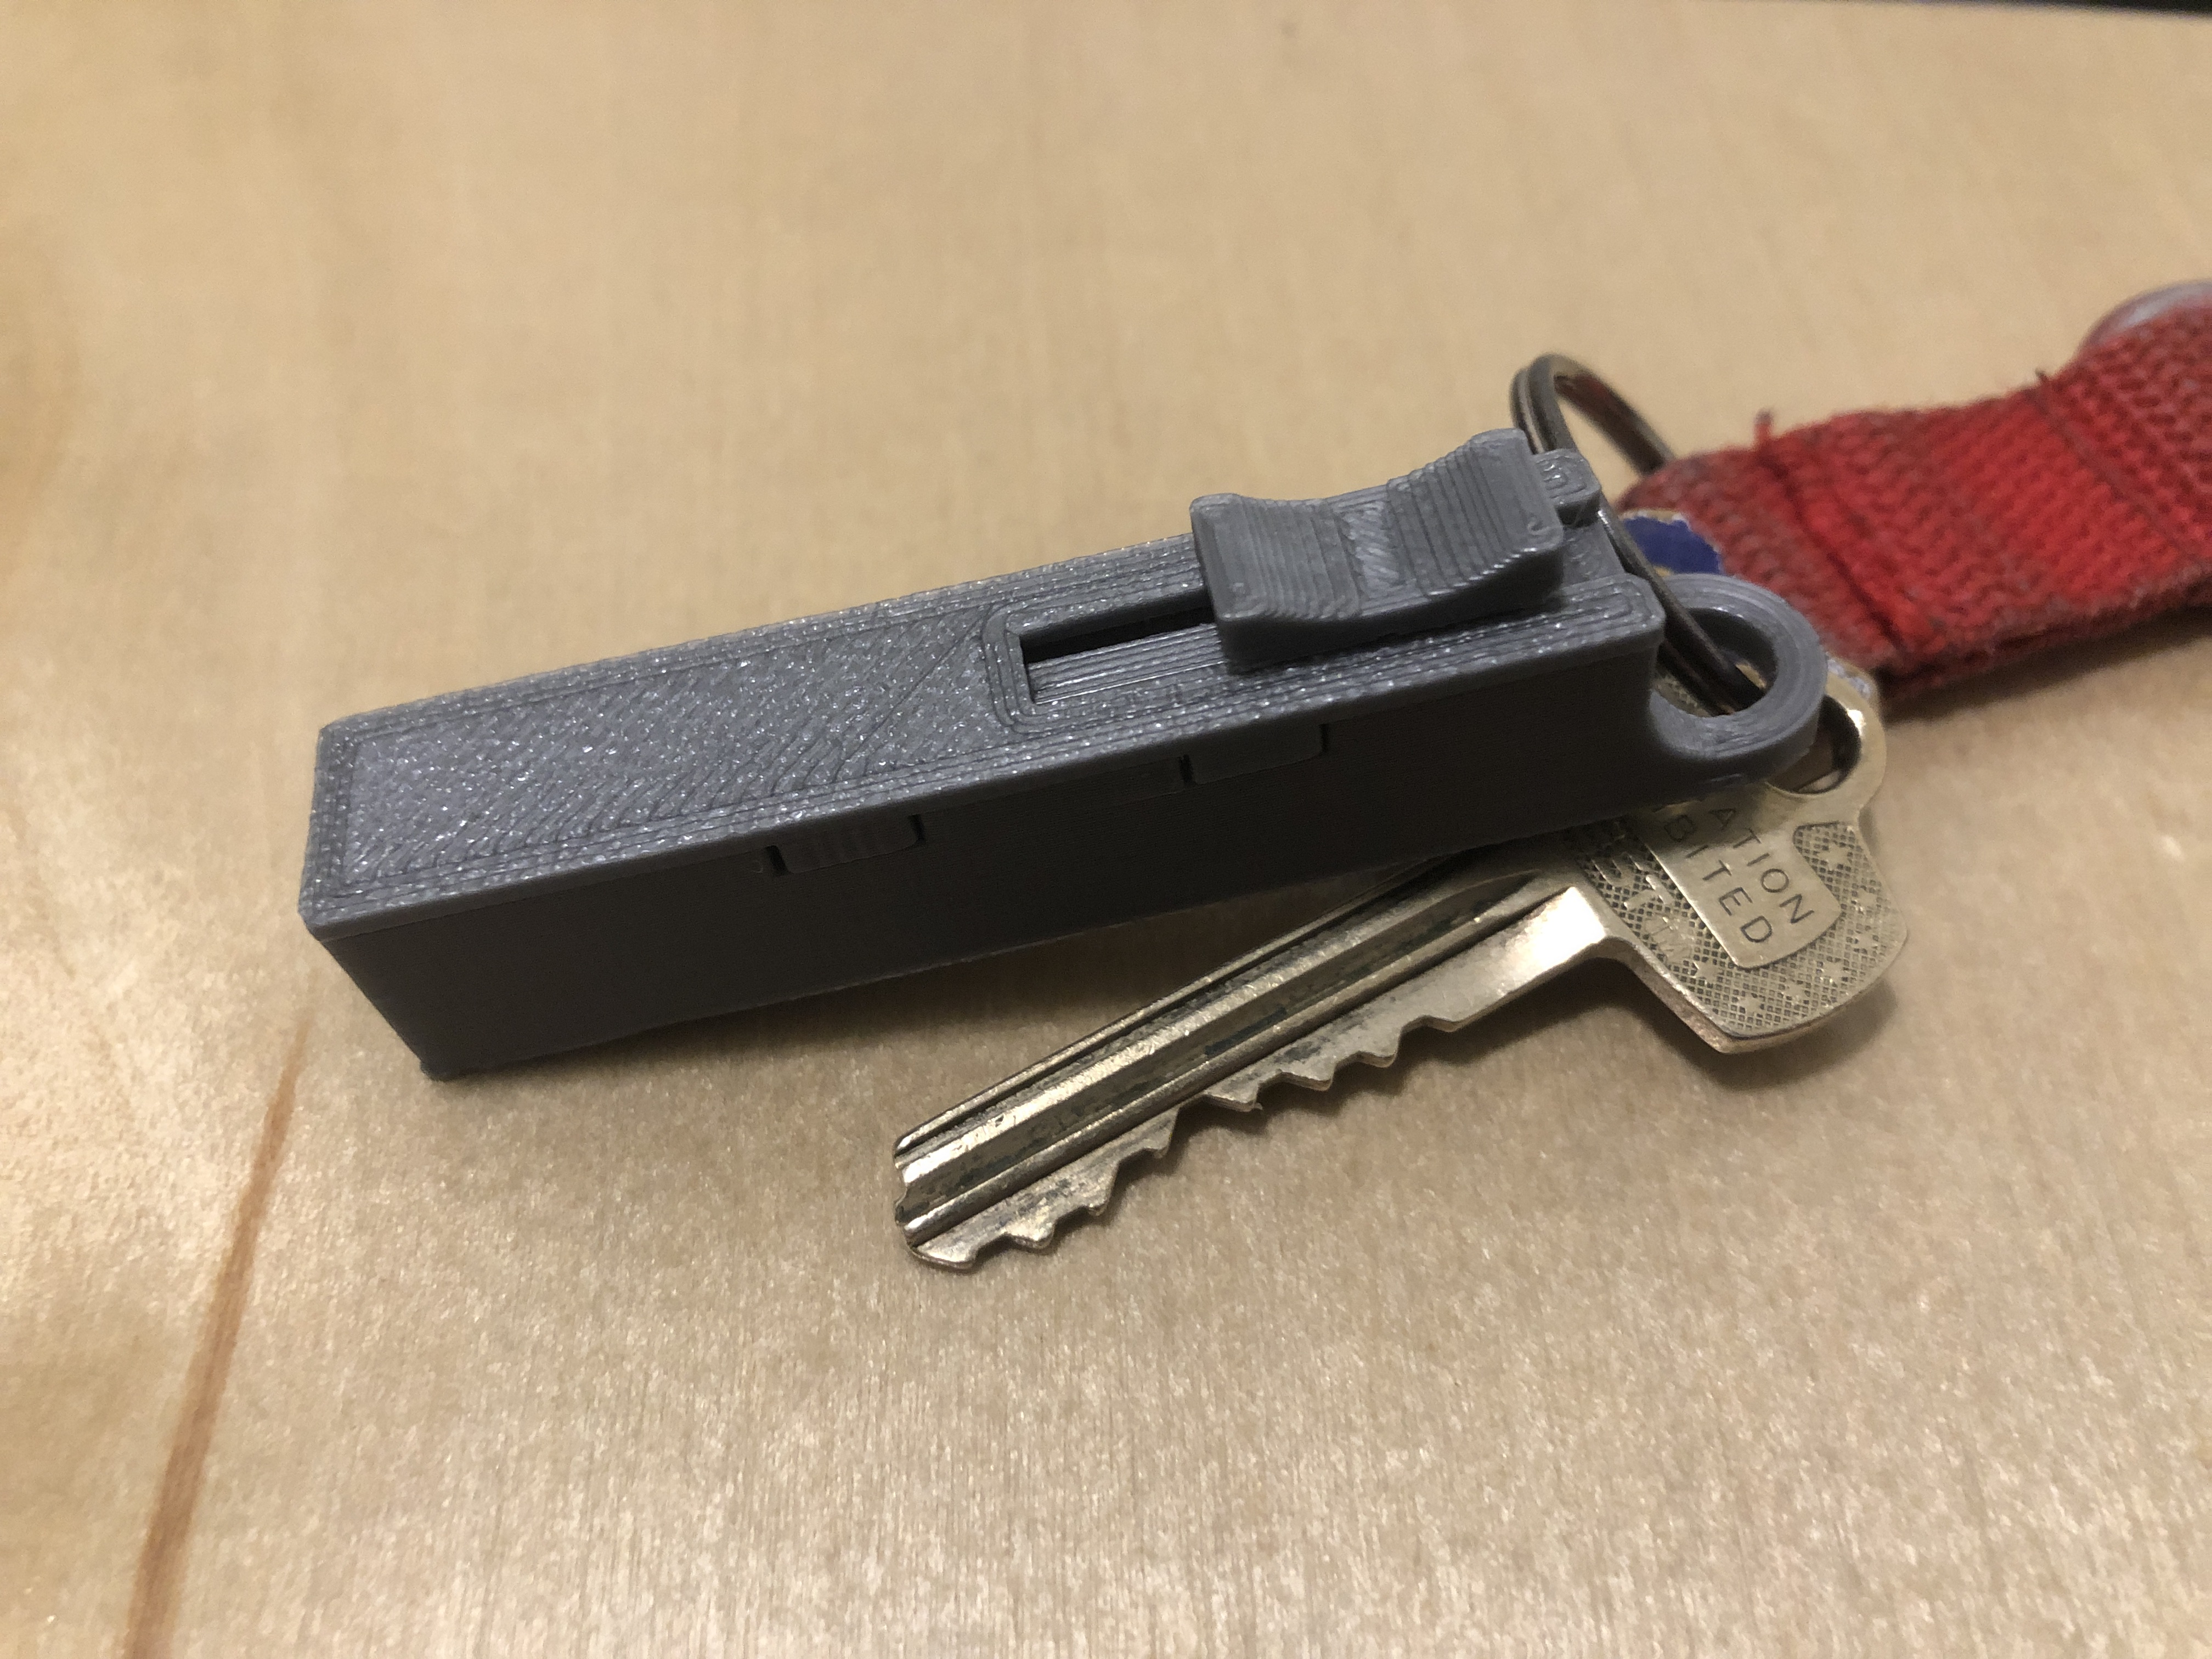 Exacto knife keychain remix by Marlin, Download free STL model